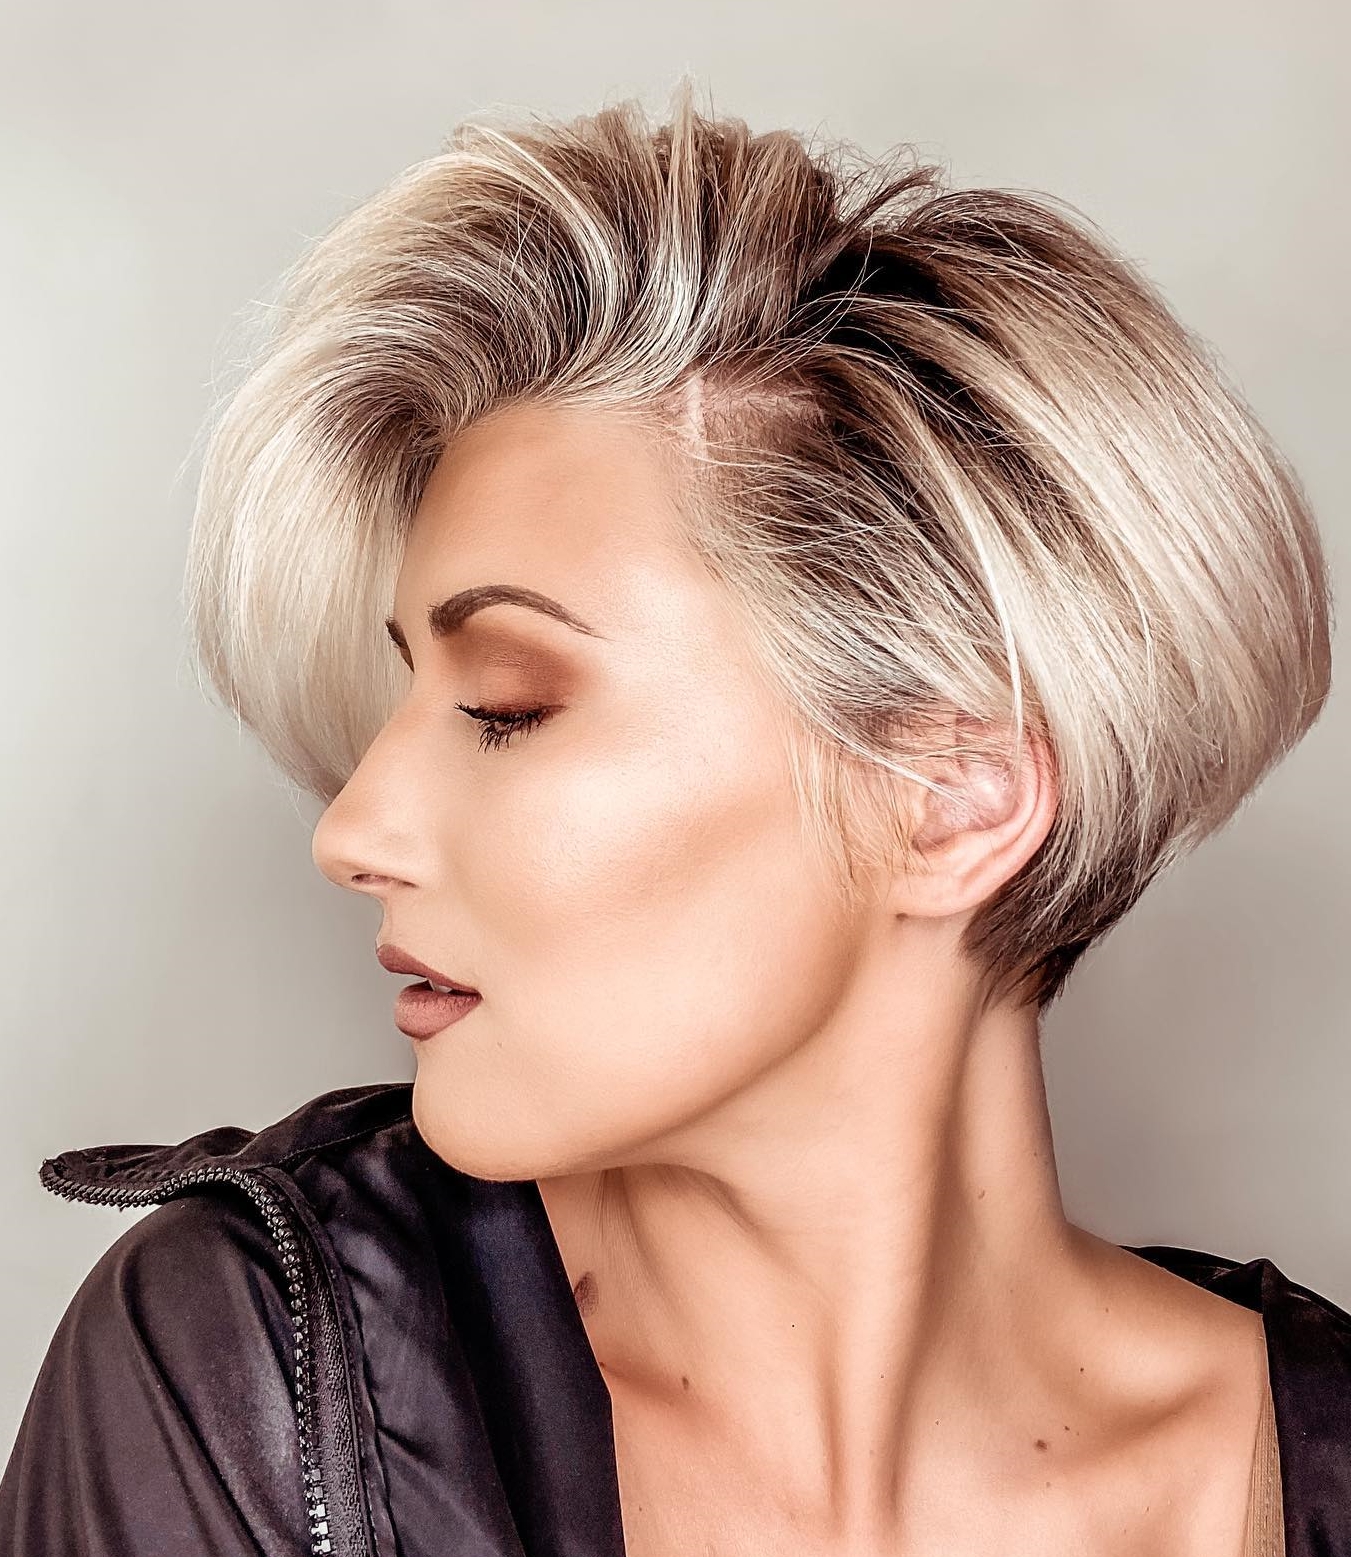 Blonde Hair with Dark Roots on Pixie Cut